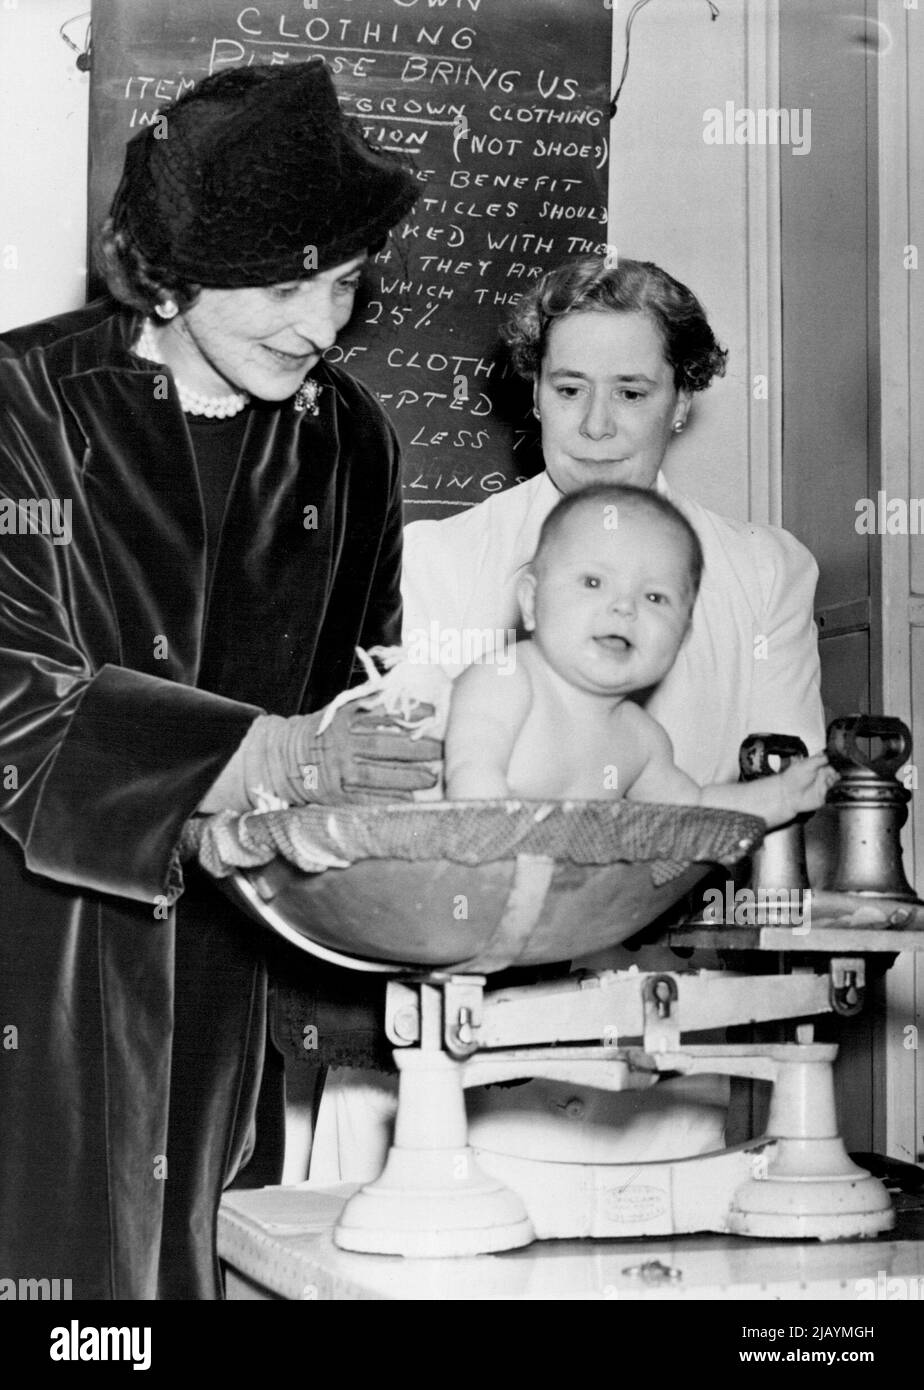 The Duchess of Kent Visits The Babies Club - During her visit to the Chelsea Babies Club, the Duchess of Kent weighed Laura Ann Dearborn, 6-months-old daughter of Mrs. Hamilton Dearborn, who is married to an American from Washington. Watching is a member of the Club Staff. HRH The Duchess of Kent today paid a visit to the Babies Club in Danvers Street, Chelsea, of which she is the President. Although an important day for them, many of the Club Members appeared distinctly unimpressed by the Royal visitor. October 31, 1951. (Photo by Fox Photos). Stock Photo